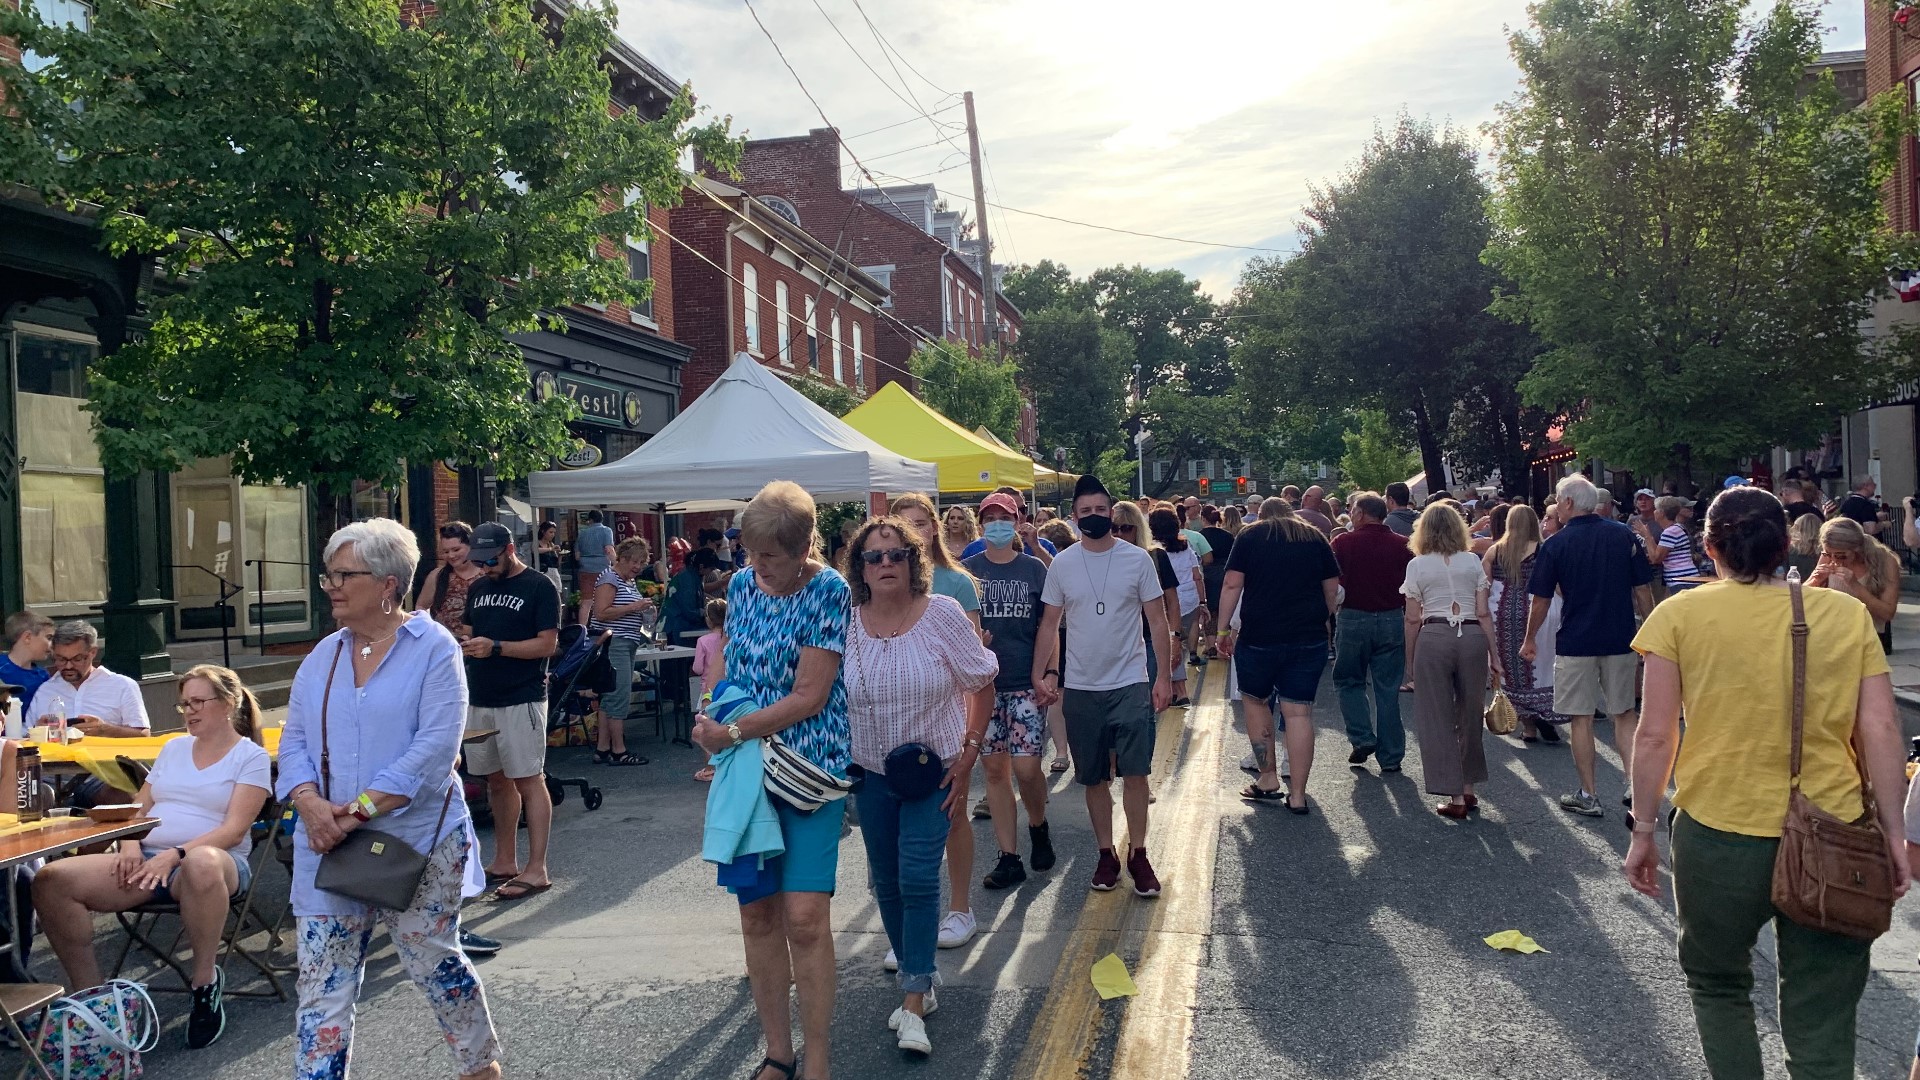 More than 30 vendors from Lititz flocked downtown for the event, which offered residents a wide variety of food and drink.